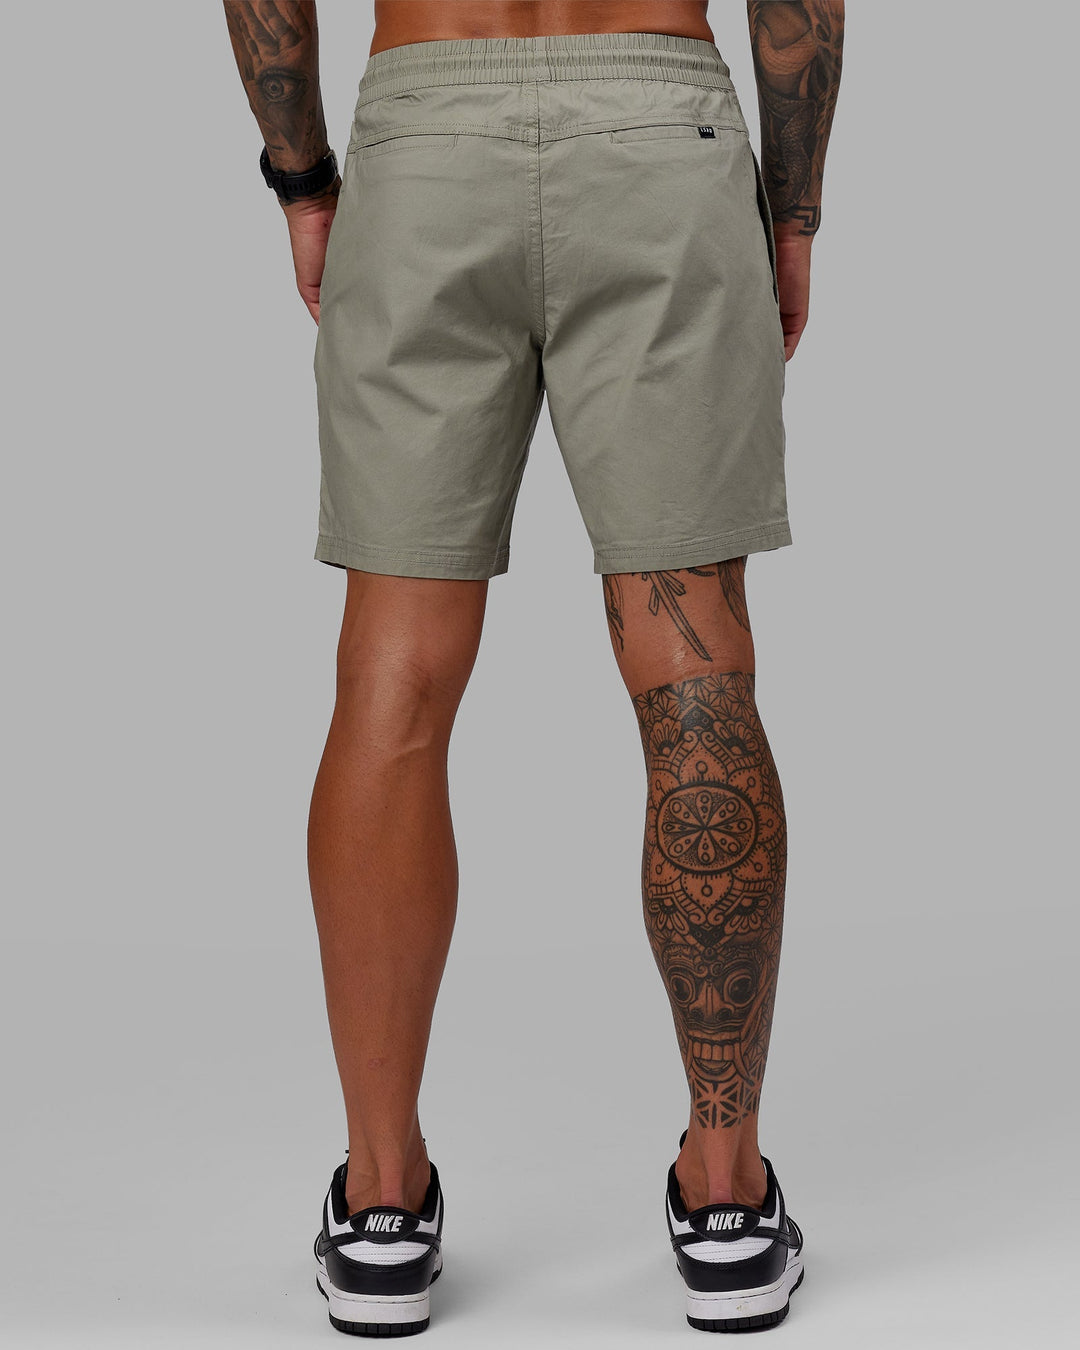 Man wearing Daily Short - Dusty Olive